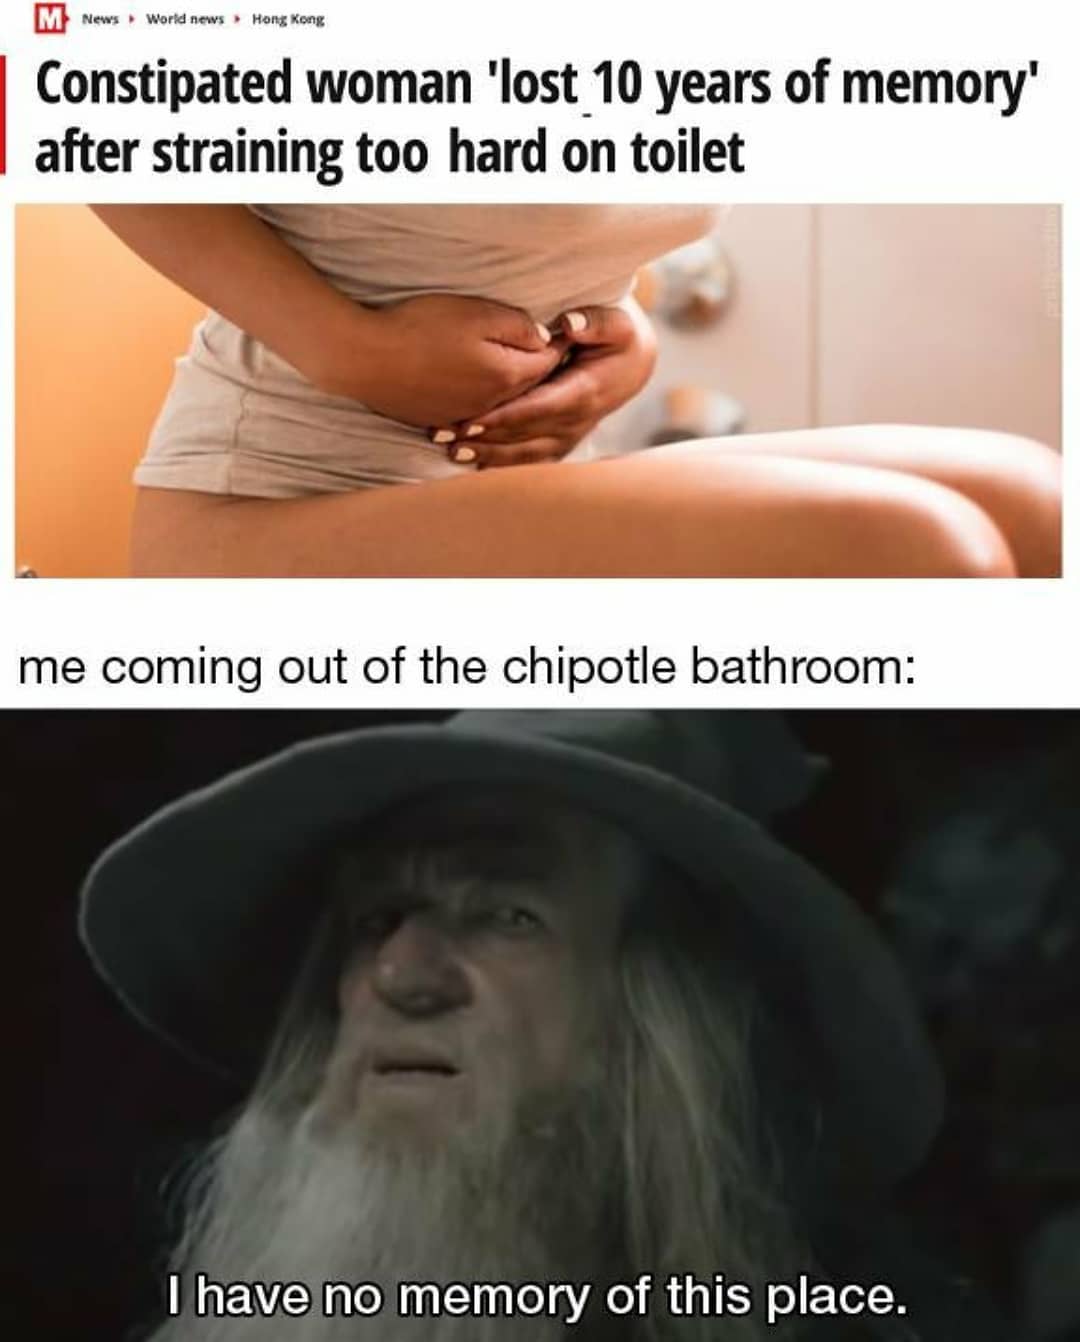 dank memes - photo caption - M News World news Hong Kong Constipated woman 'lost 10 years of memory' after straining too hard on toilet me coming out of the chipotle bathroom I have no memory of this place.